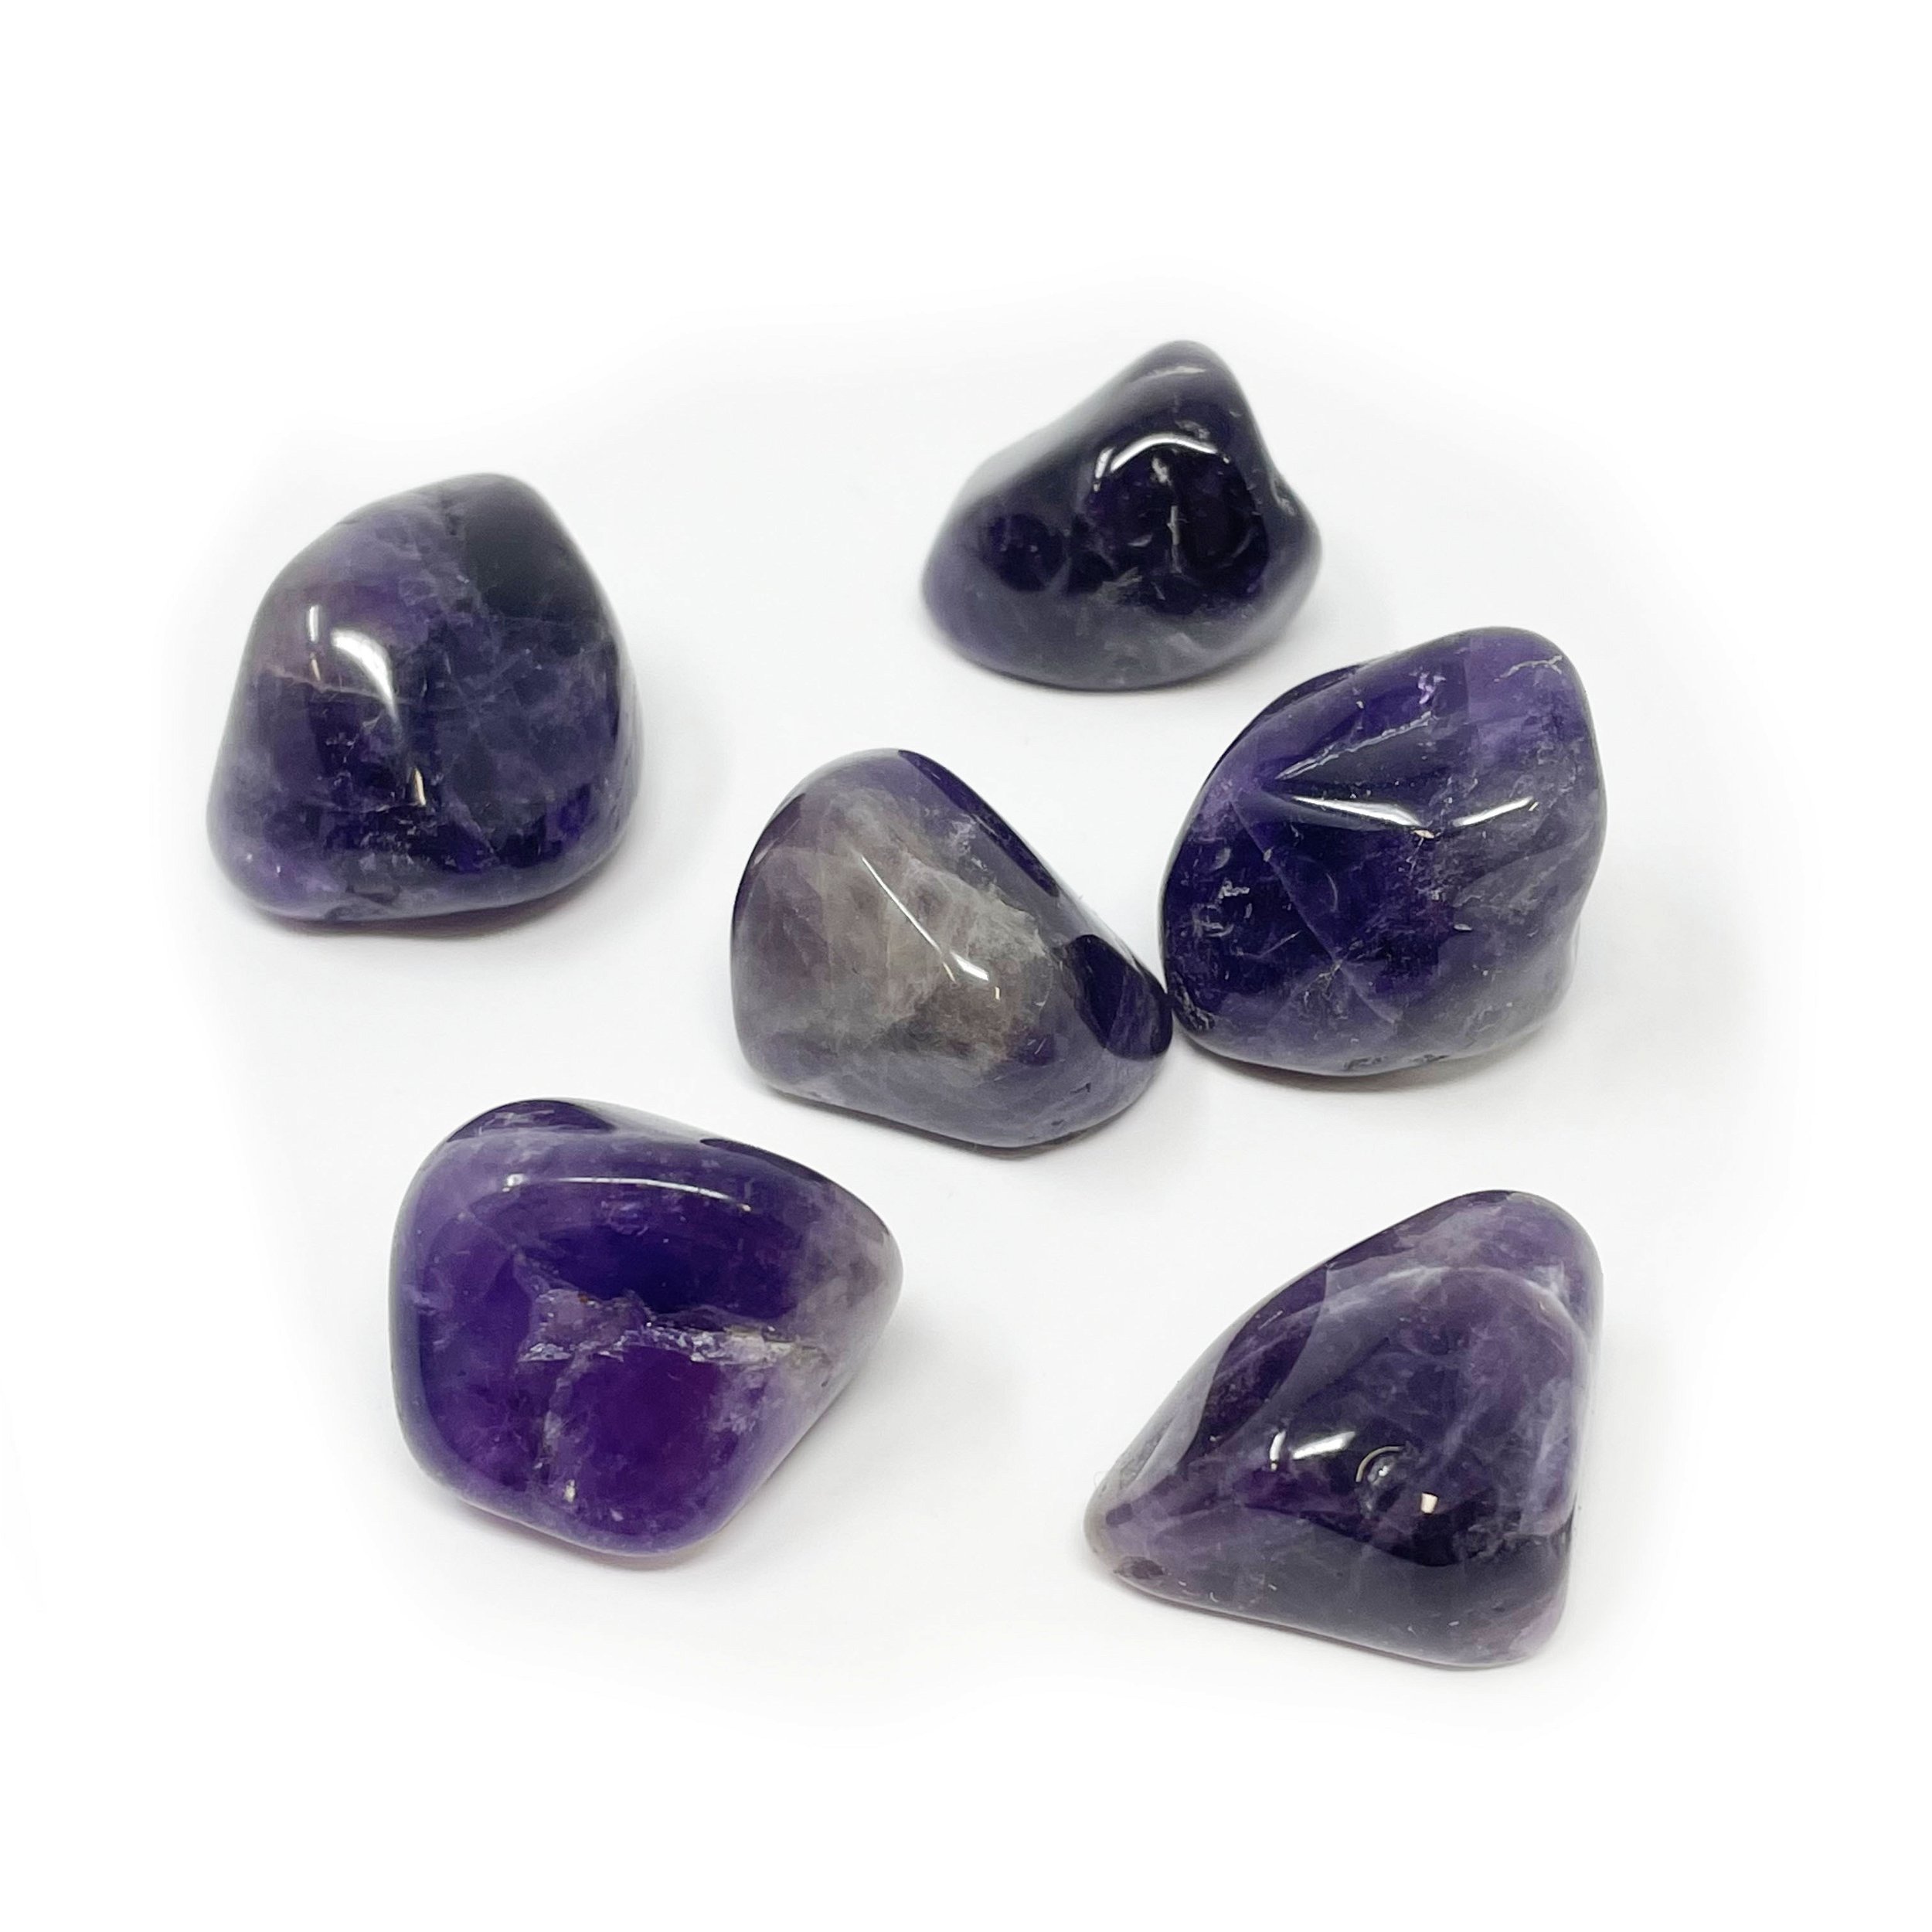 Tumbled Amethyst From Brazil (Singles)